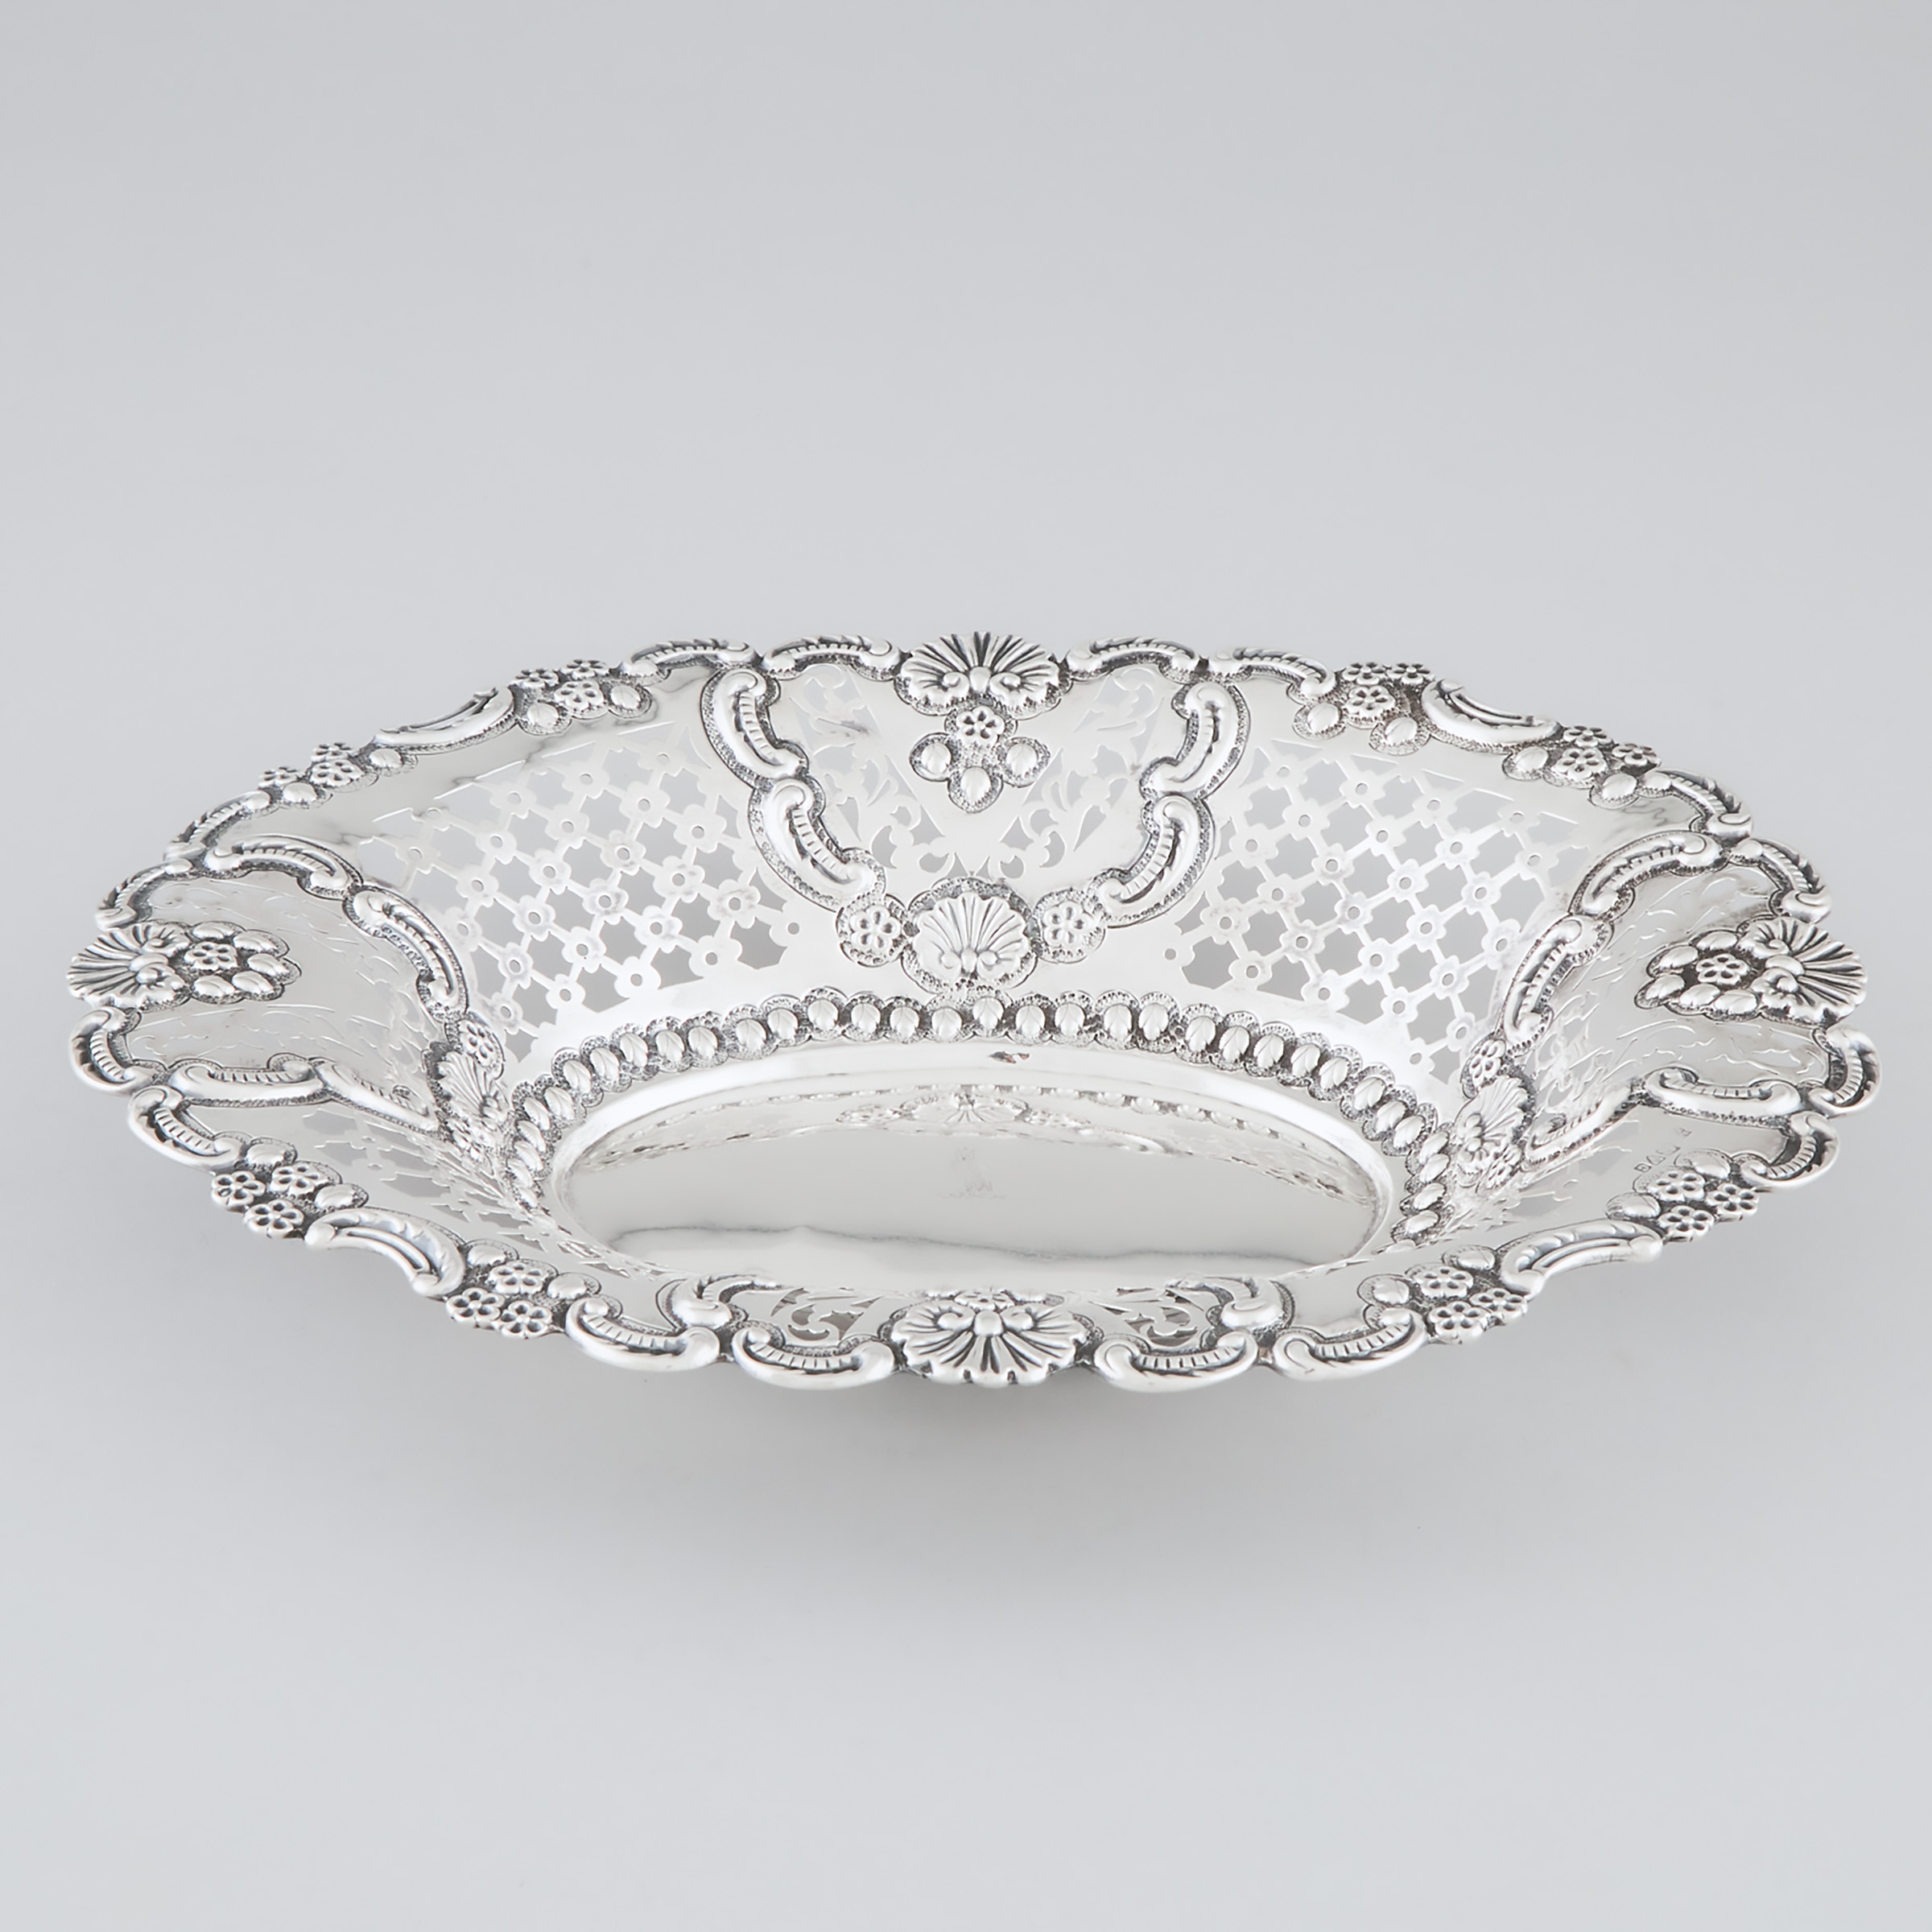 Edwardian Silver Pierced Oval Basket, George Nathan & Ridley Hayes, Chester, 1902